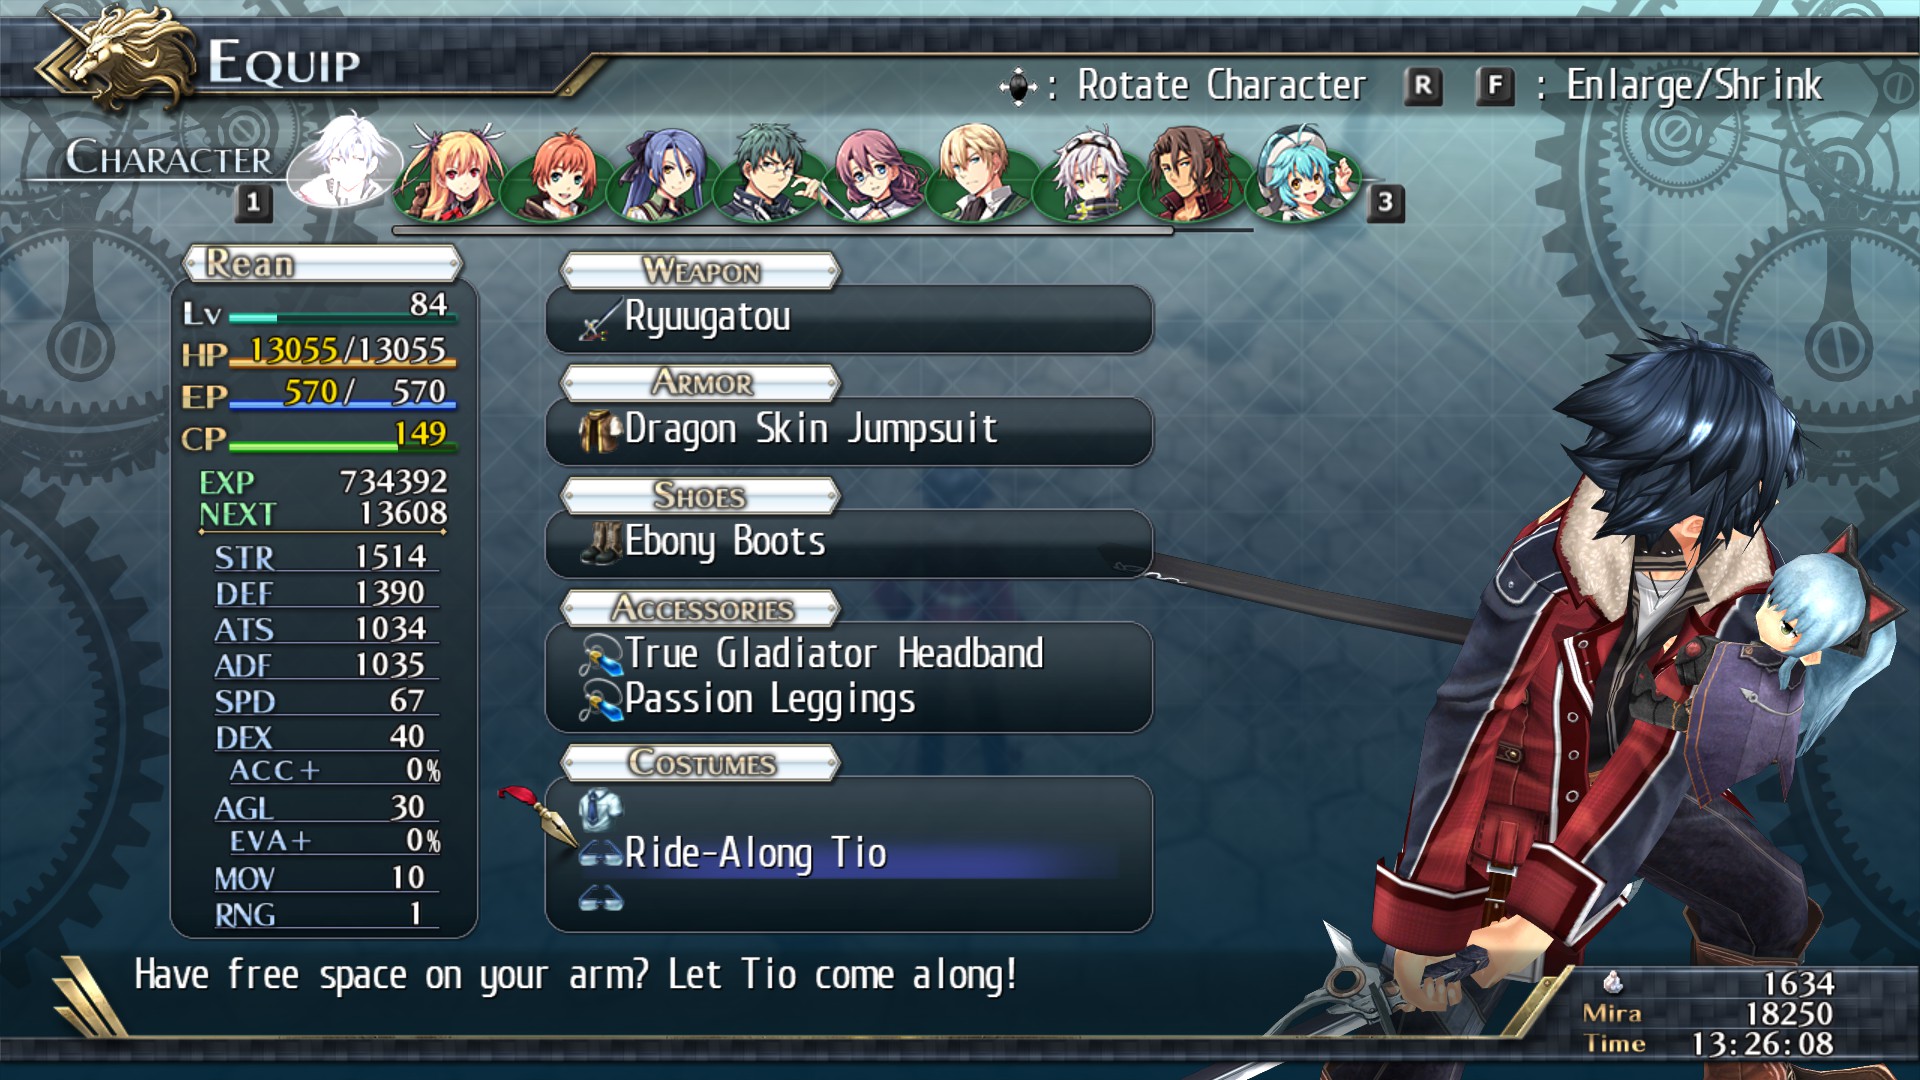 The Legend of Heroes: Trails of Cold Steel II - All Ride-Alongs Featured Screenshot #1